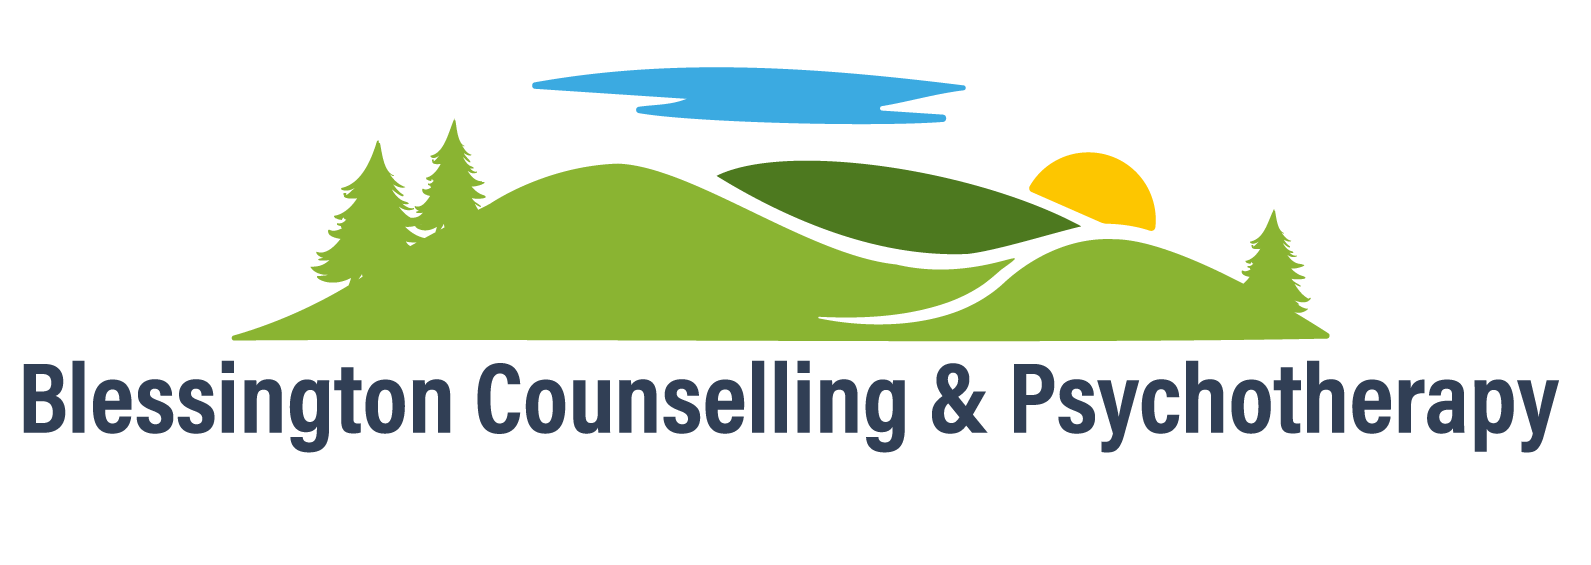 Blessington Counselling and Psychotherapy